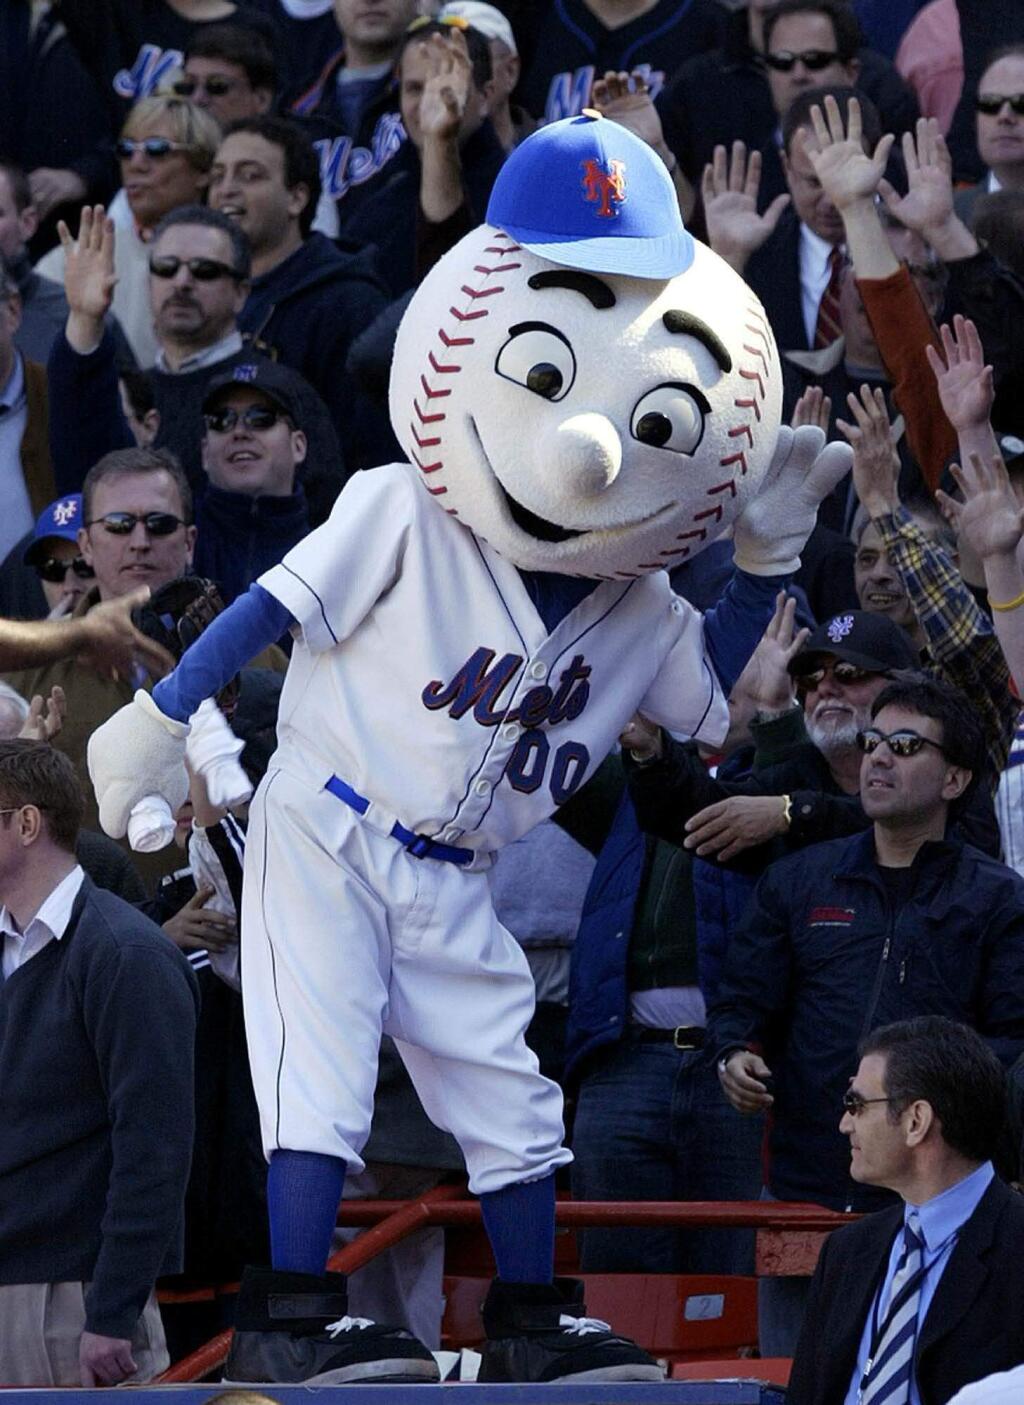 FILE - In this April 11, 2005, file photo, New York Mets mascot Mr. Met reacts with the crowd during the Mets home opener against the Houston Astros at Shea Stadium in New York. Even Mr. Met is frustrated with the team's start. New York's beloved mascot flashed an upraised middle finger at a fan during Wednesday night's, May 31, 2017, 7-1 loss to the Milwaukee Brewers, and the employee will not work for the Mets again. A Mets official told The Associated Press more than one person wears the Mr. Met costume during each season, and the person who donned it Wednesday night will not do so again. The Mets official spoke on condition of anonymity because the statement from the organization was the team's only authorized comment. (AP Photo/Gregory Bull, File)